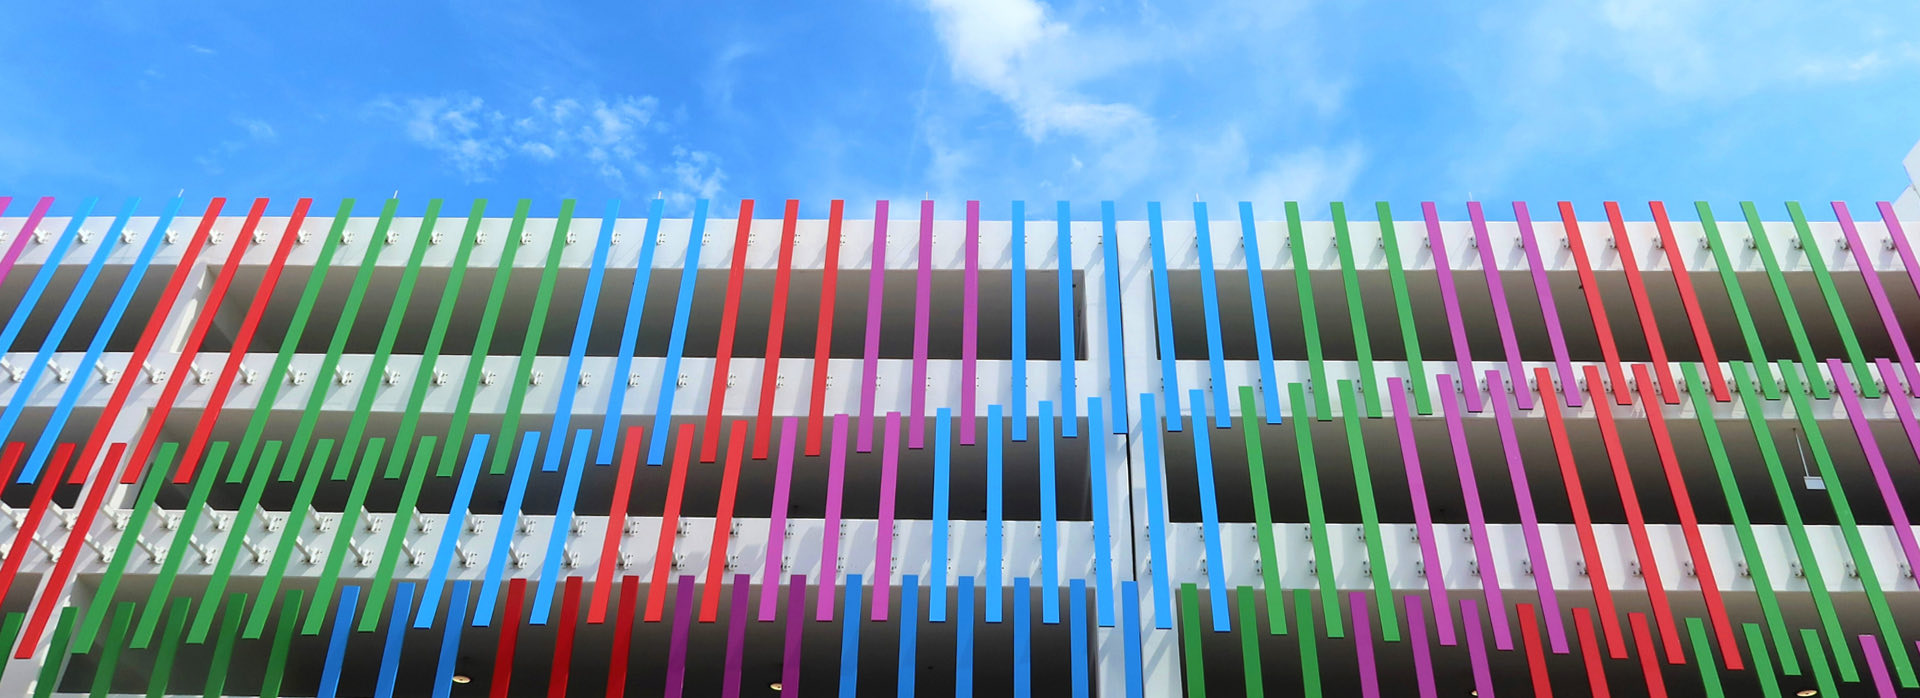 lake nona wave hotel exterior with colored panels